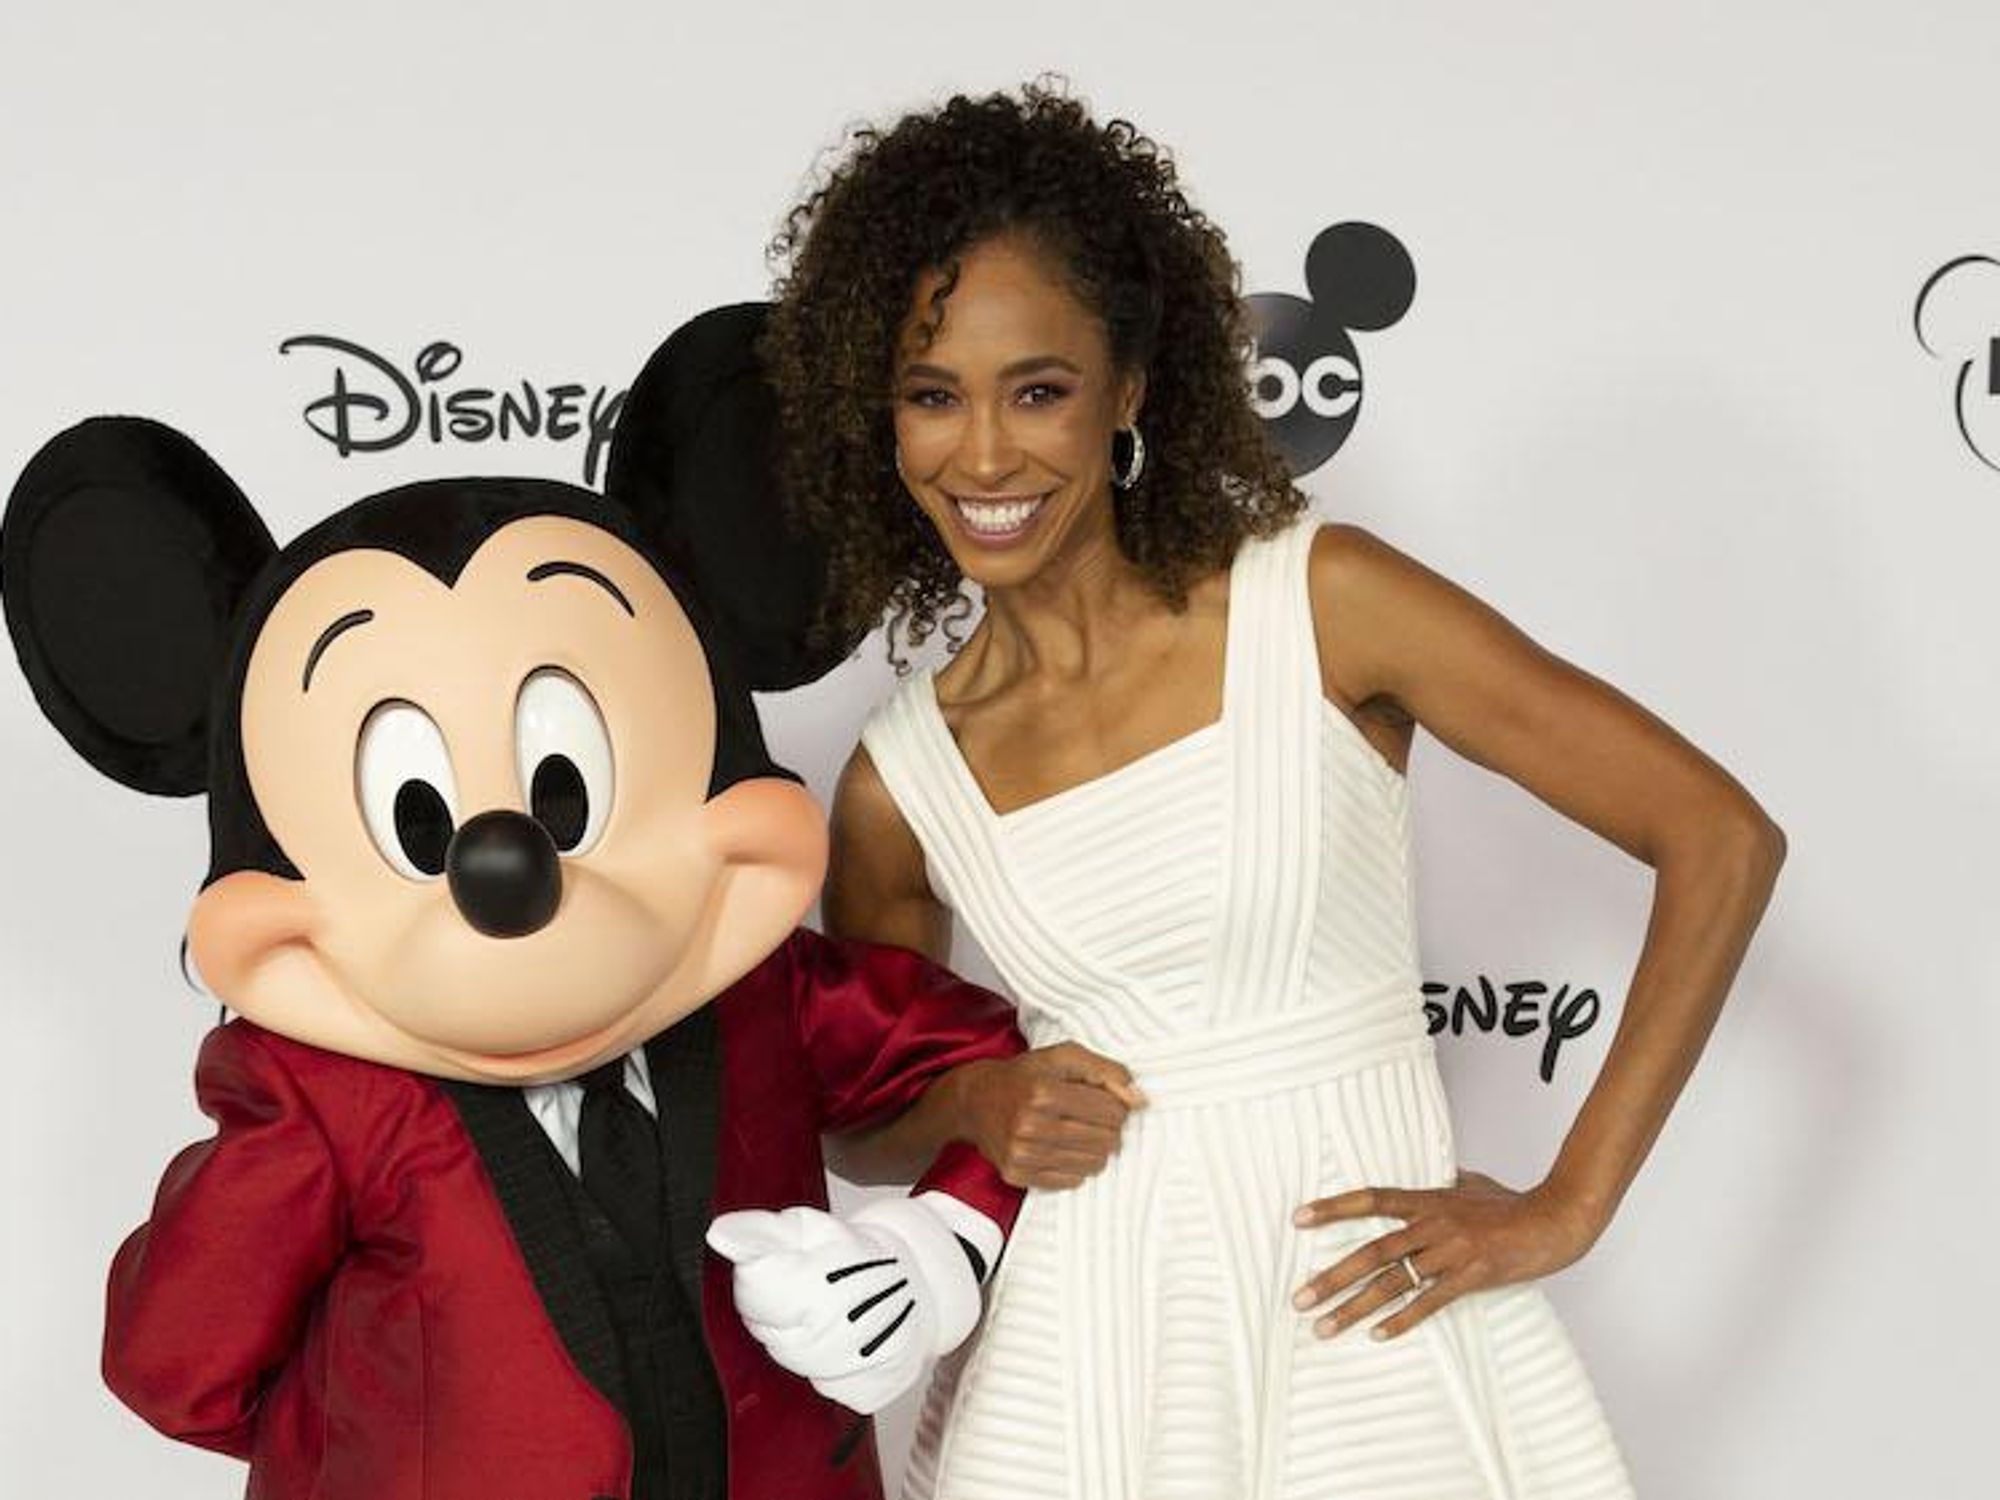 Espn Star Blasts Disney S Sick Scary Vaccine Mandate Says She Got The Jab But Didn T Want To Do It Amnon Free Press